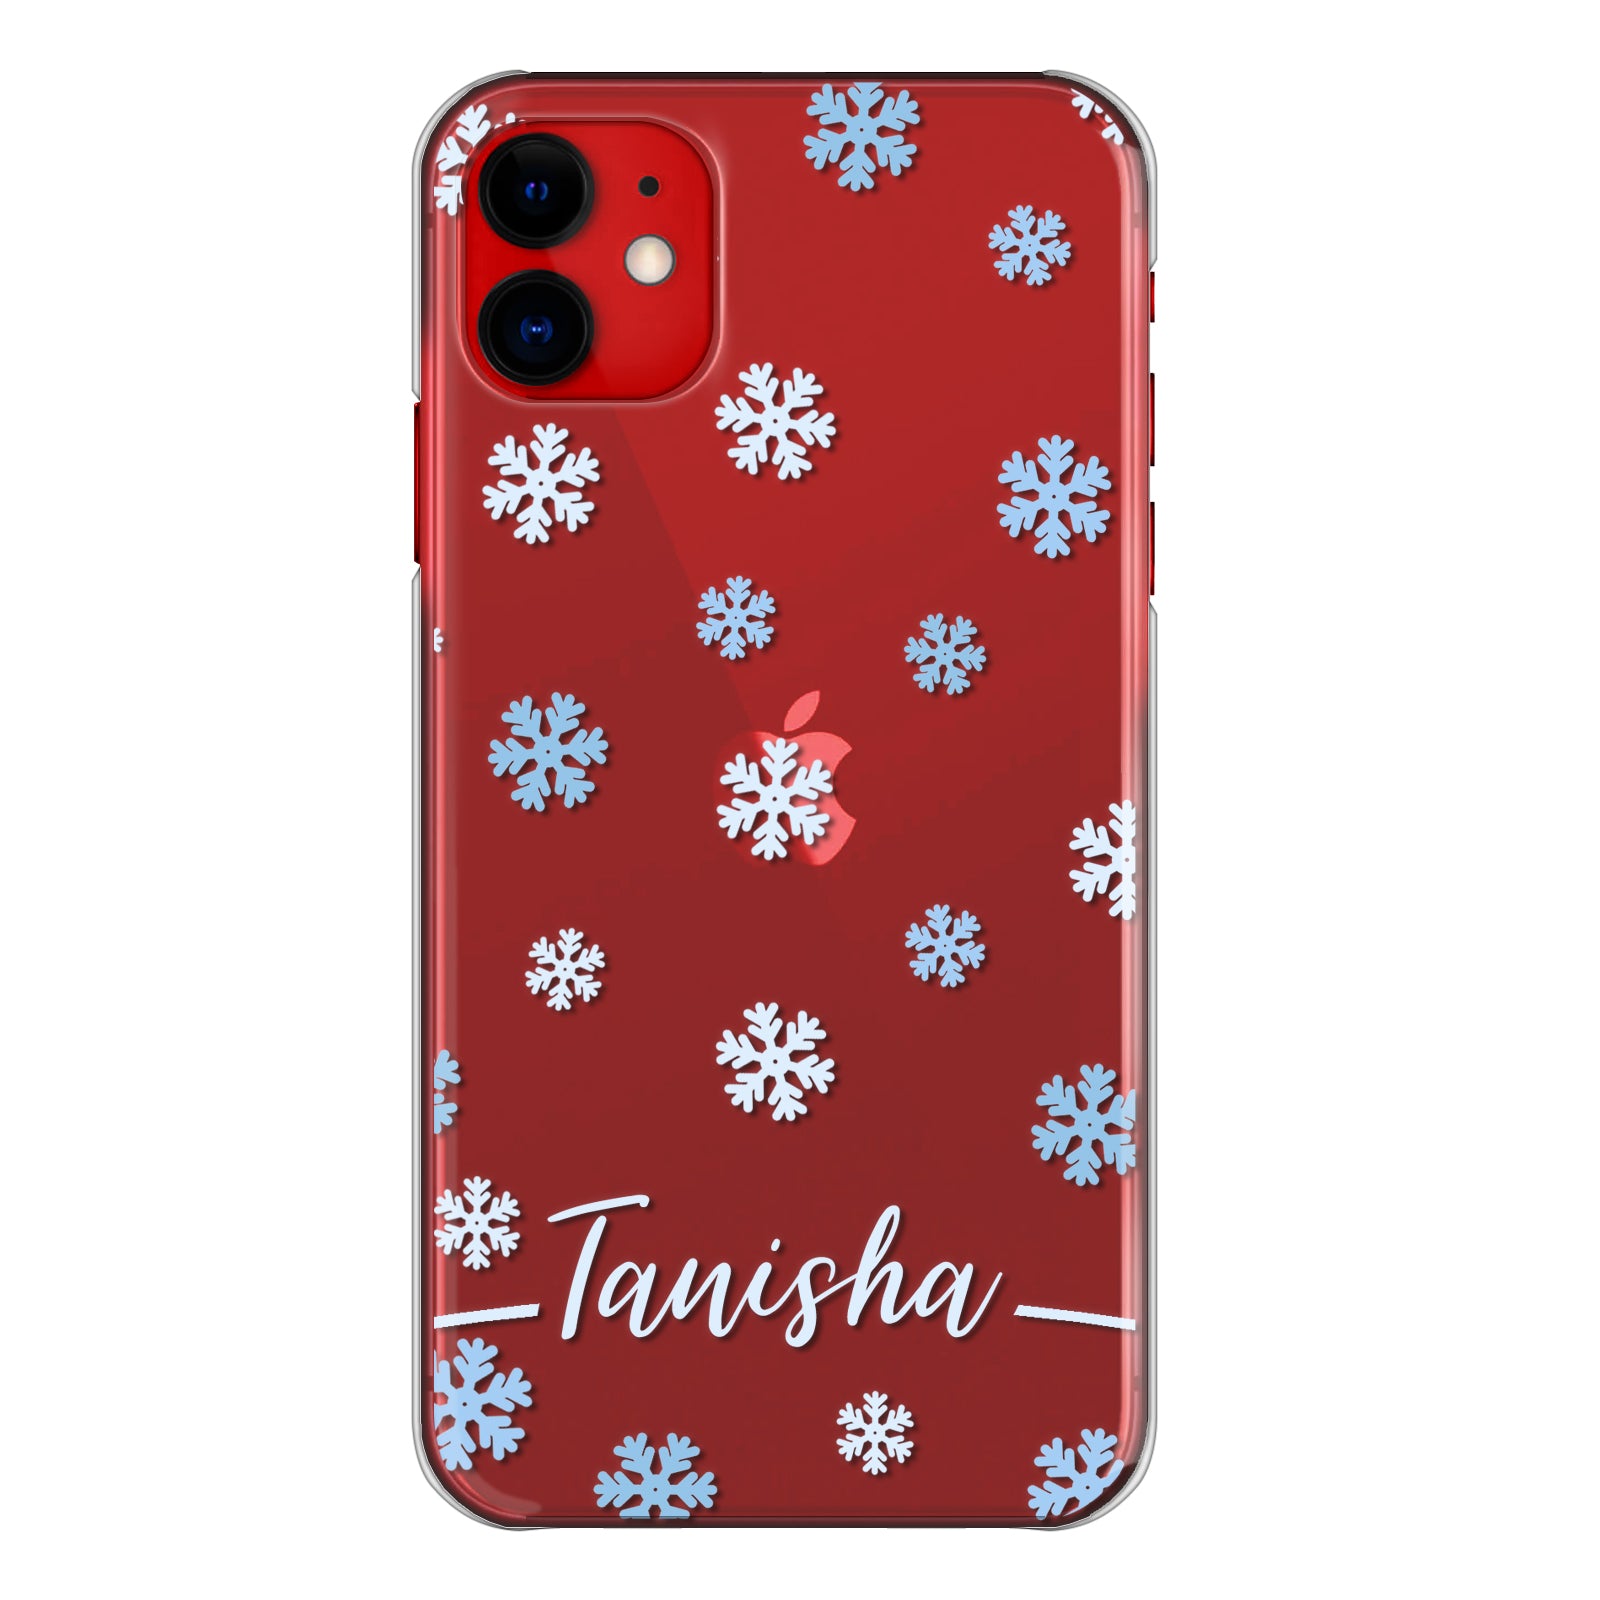 Personalised LG Phone Hard Case with Falling Snowflakes and Stylish White Text